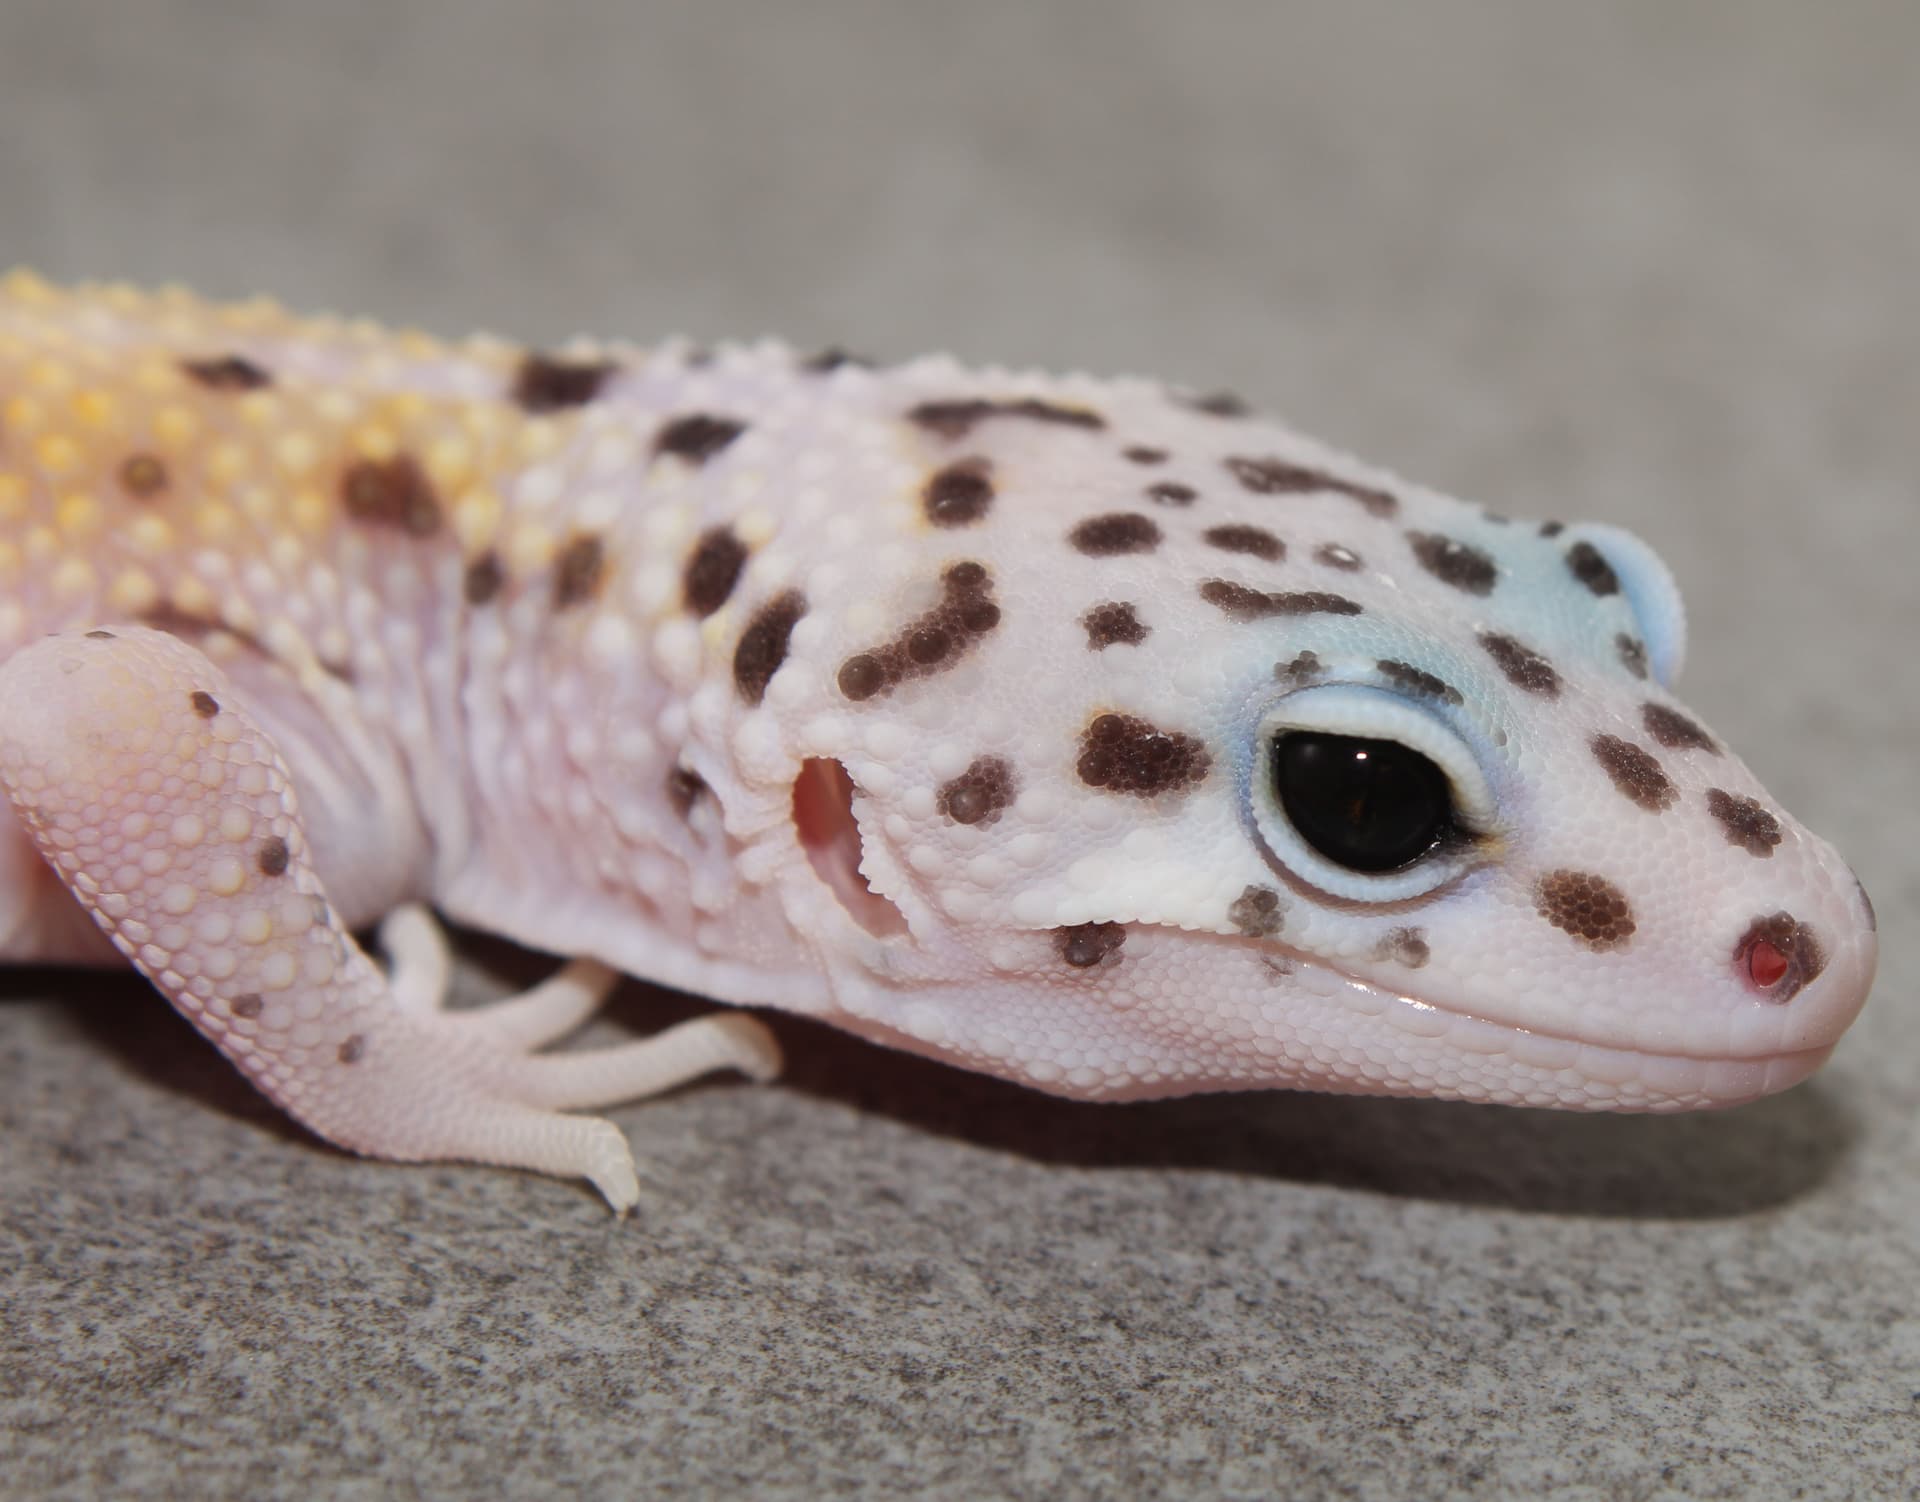 Cipher Leopard Gecko by Impeccablegecko